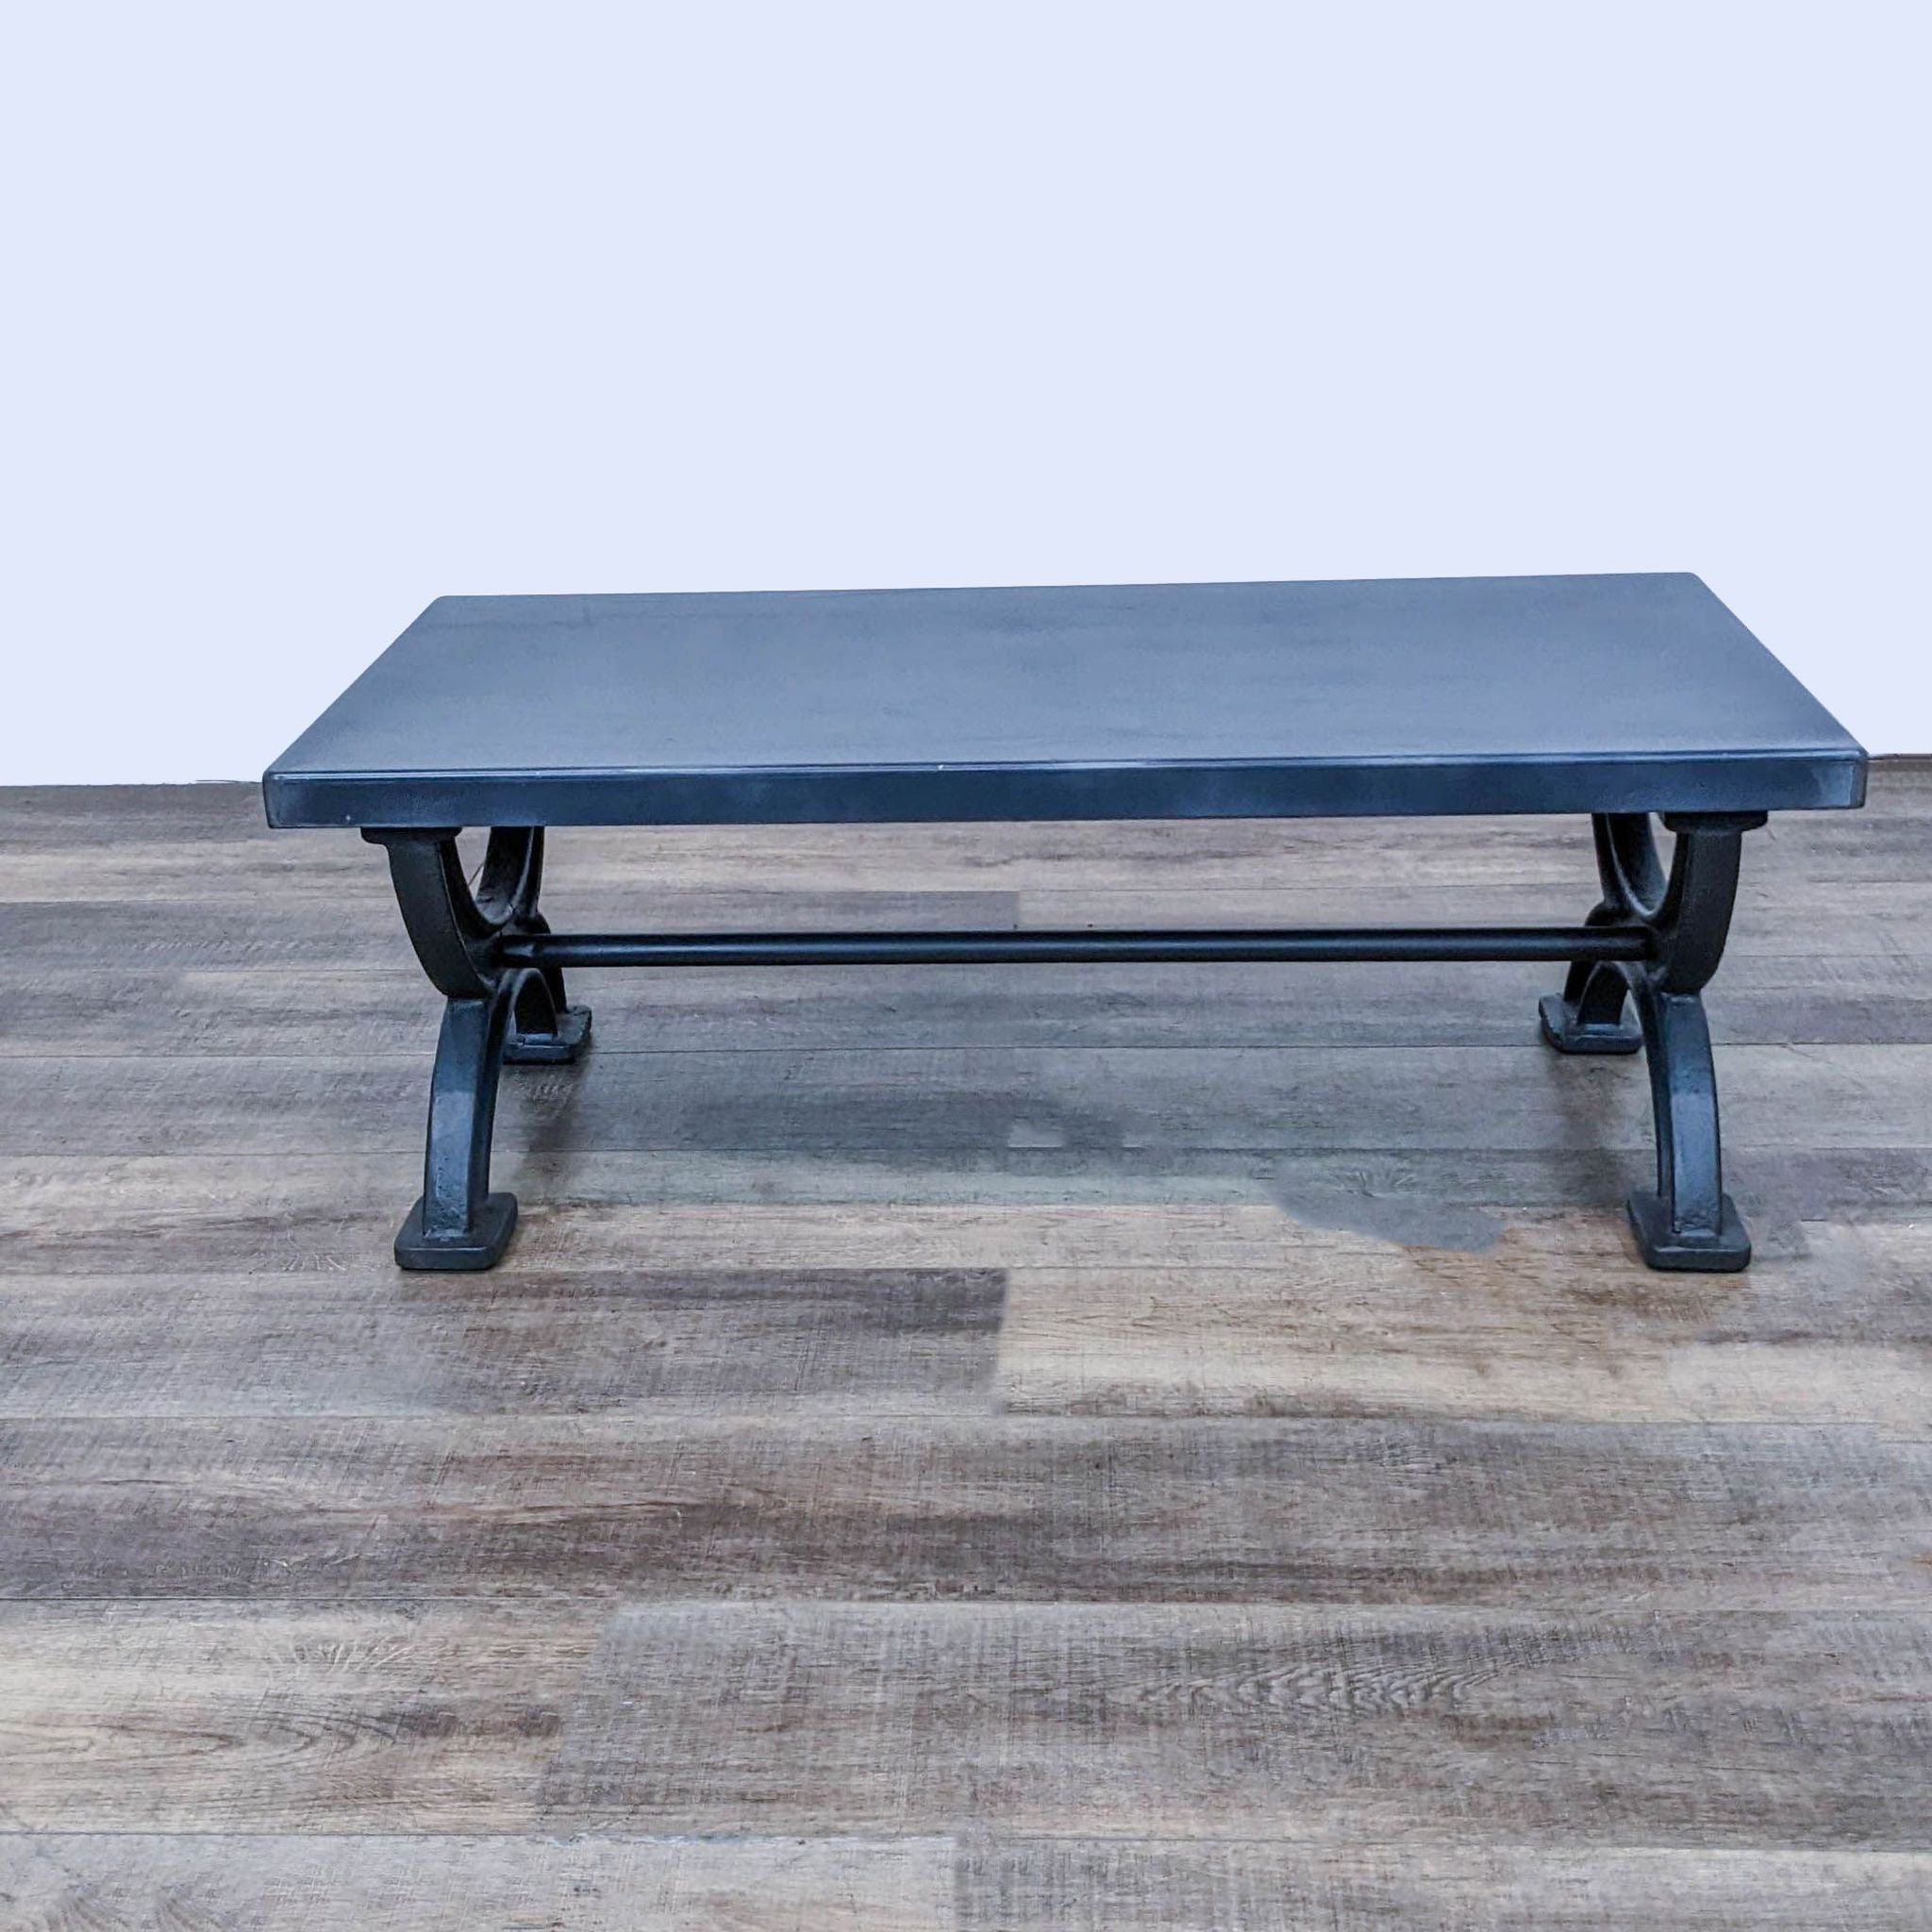 1940s-style Restoration Hardware coffee table crafted with iron legs in an X-form and a patinated metal top, embodying an industrial aesthetic.